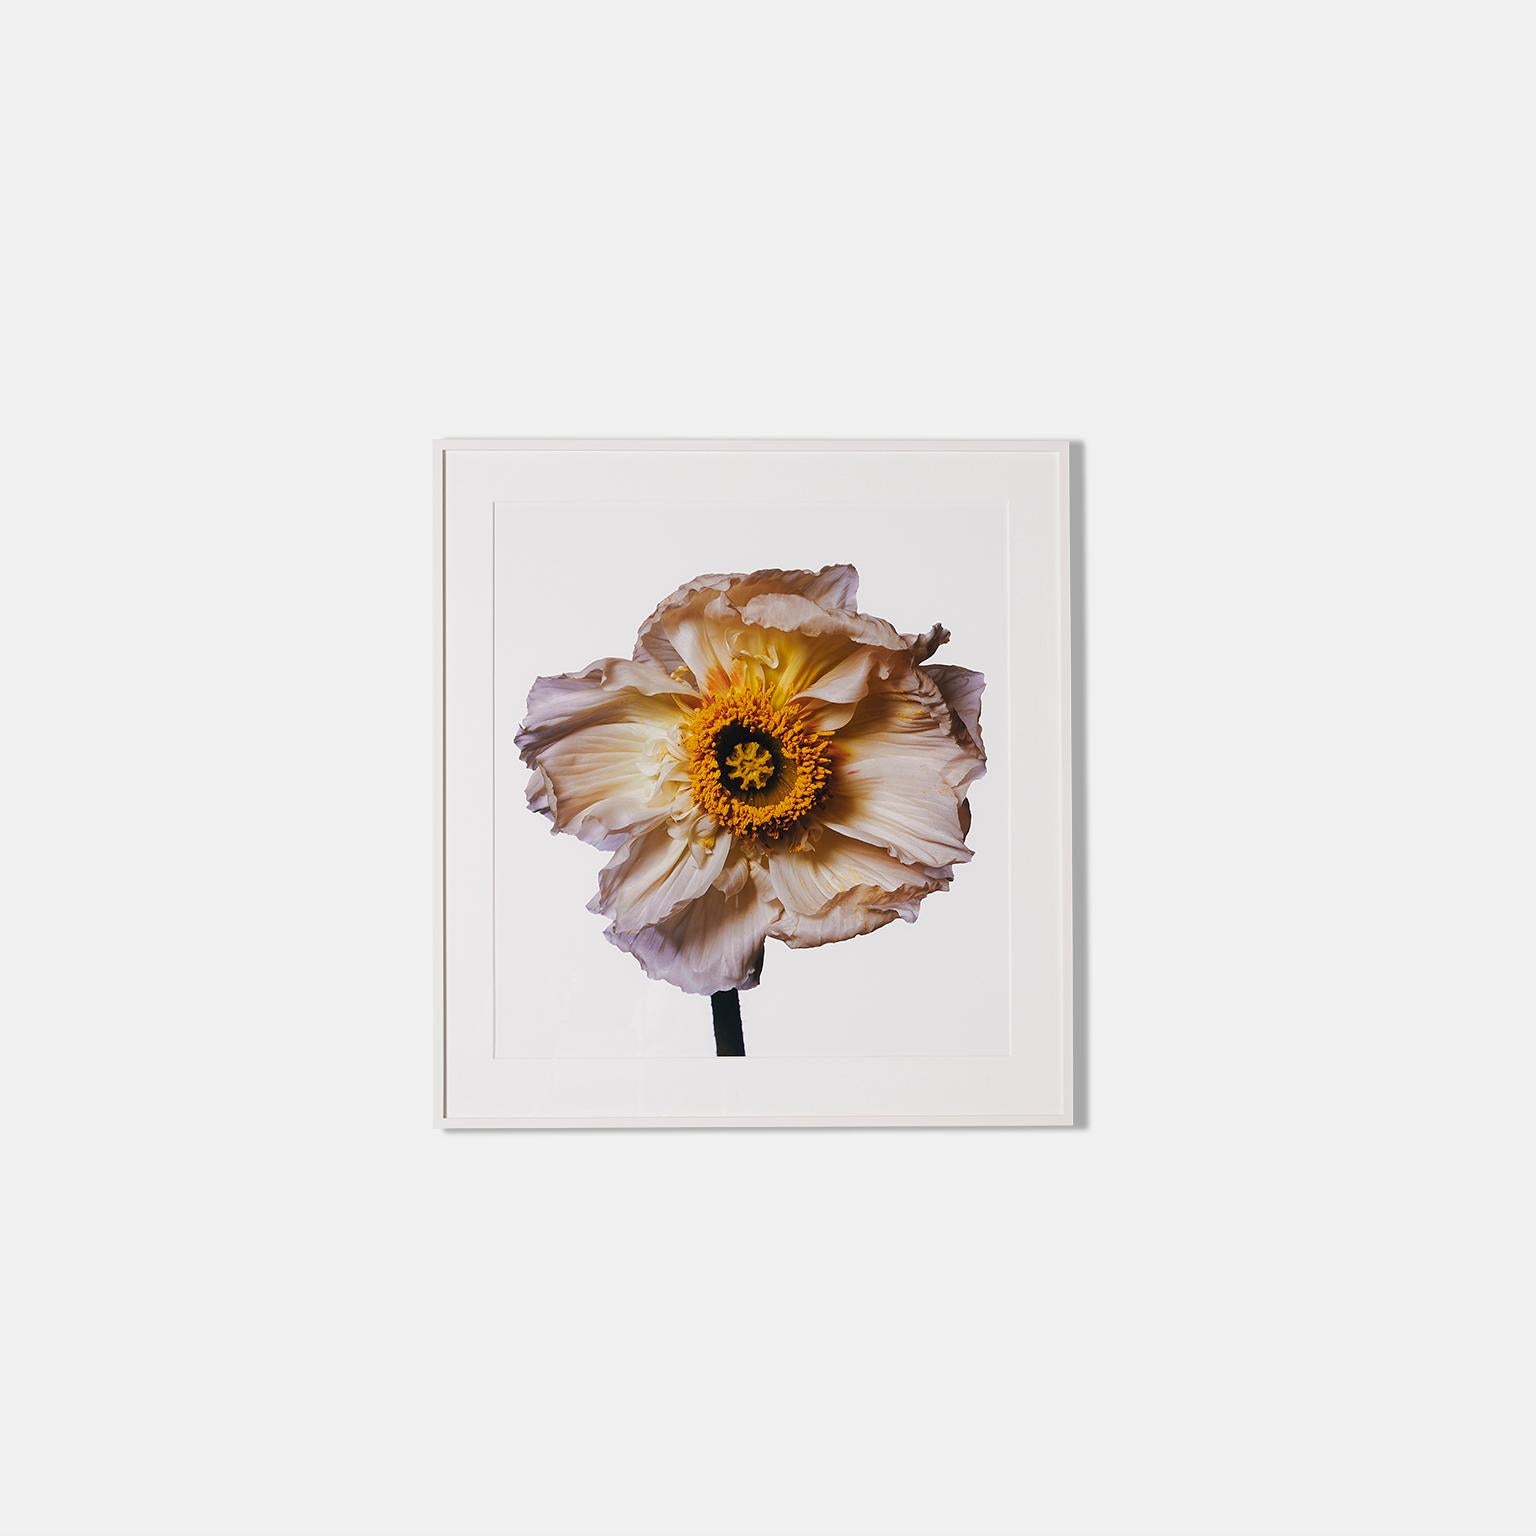 A photograph of an Iceland Poppy (E) by Michael Zeppetello in a custom wood frame lacquered white with 5 ply rag mat.
Photographed on Fujifilm Fujichrome Velvia, 100 ASA, color transparency film
Archival pigment prints, printed on Hahnemuehle